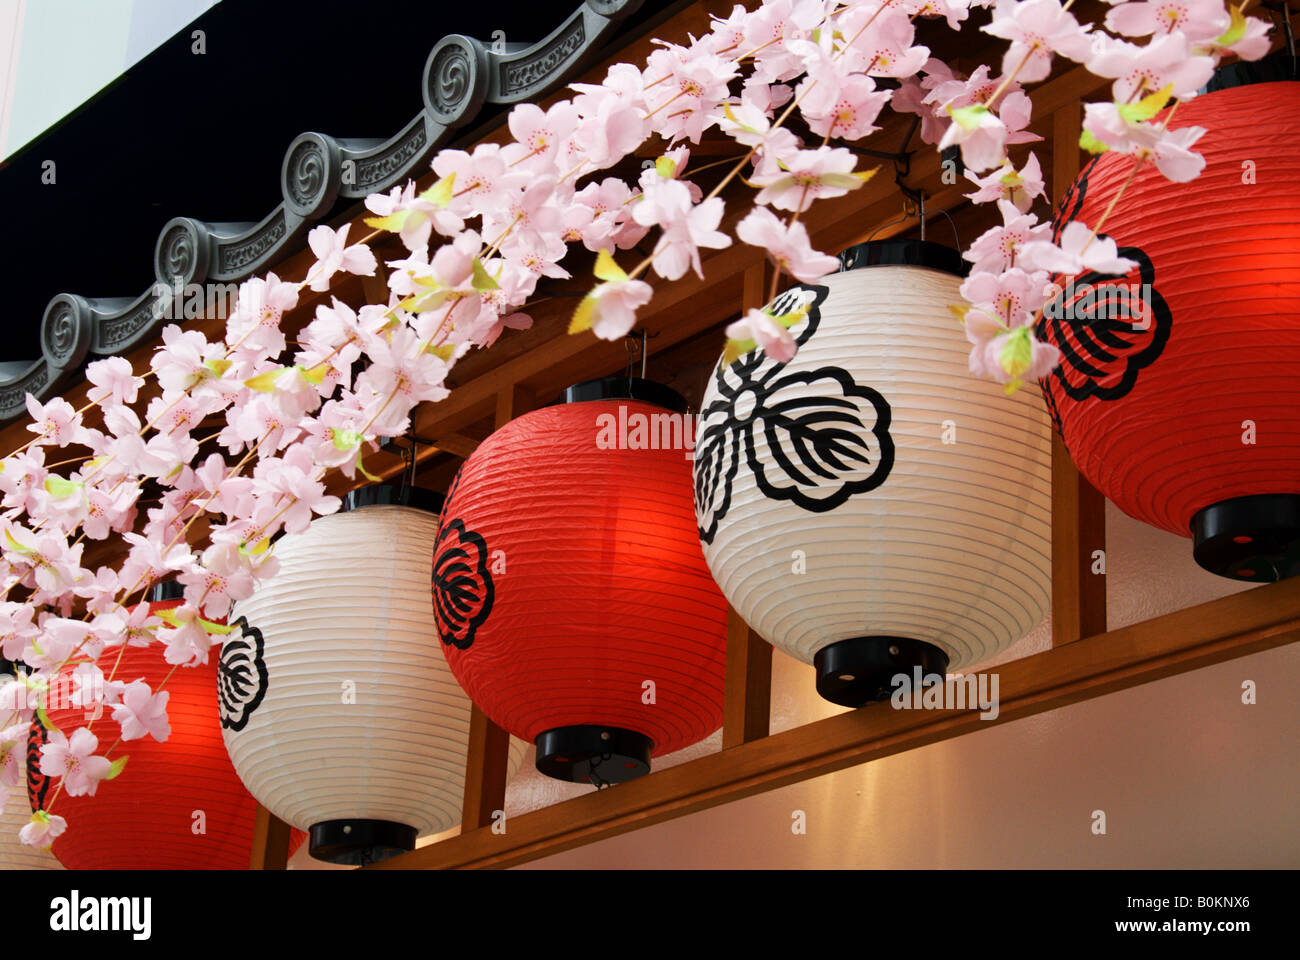 Red and white lanterns indicating a restaurant or bar in the Asakusa region of Tokyo are decorated  plastic cherry blossoms. Stock Photo